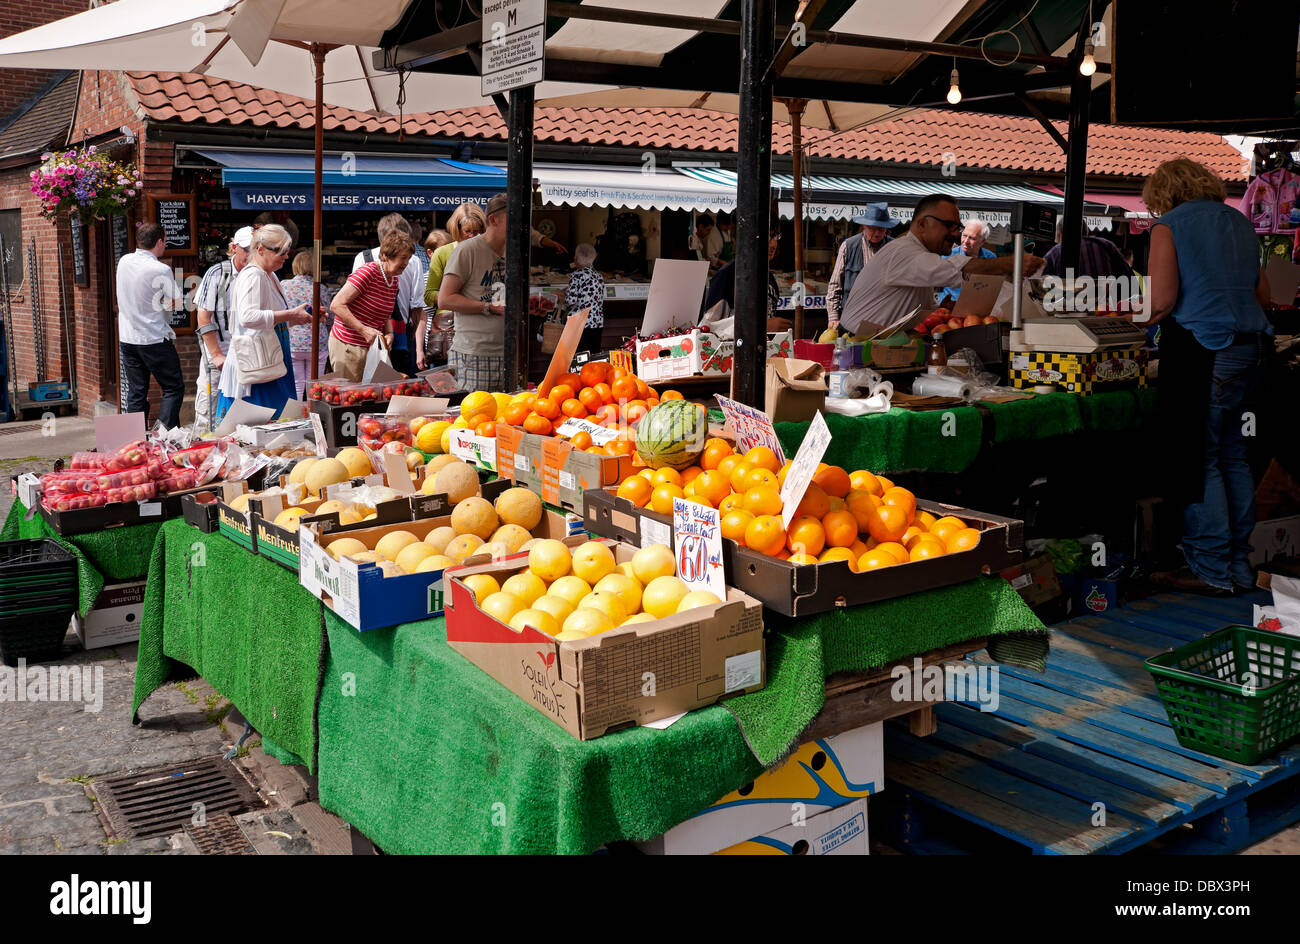 Fresh fruit for sale on outdoor market stall in summer York North Yorkshire England UK United Kingdom GB Great Britain Stock Photo